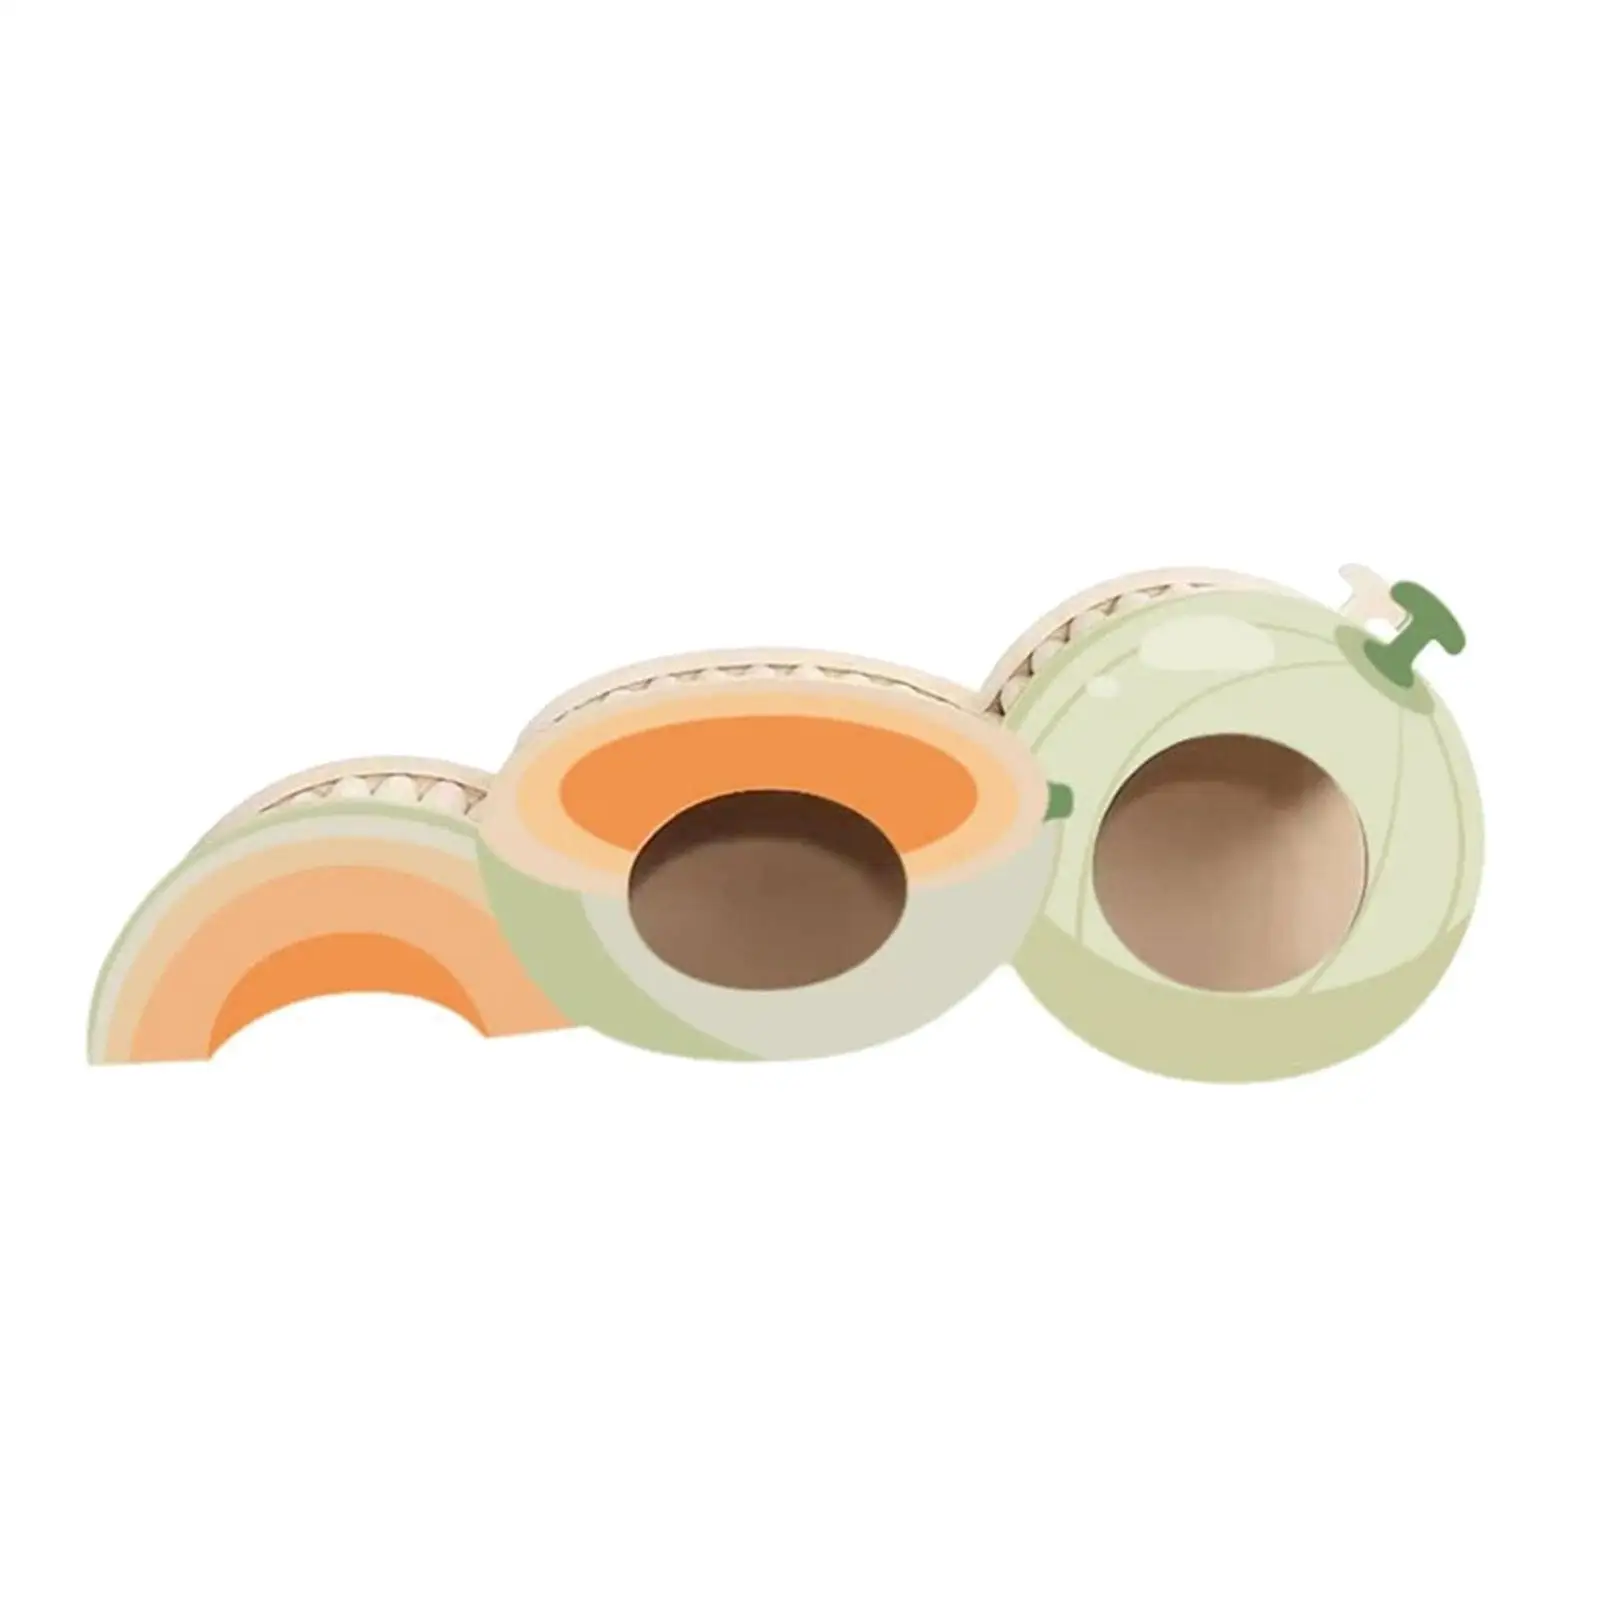 Novelty Hamster Tunnels and Bridge Wooden Pet Hamster Toy Hamster Tunnels with Climbing Ladder for Similar Sized Pets Guinea Pig